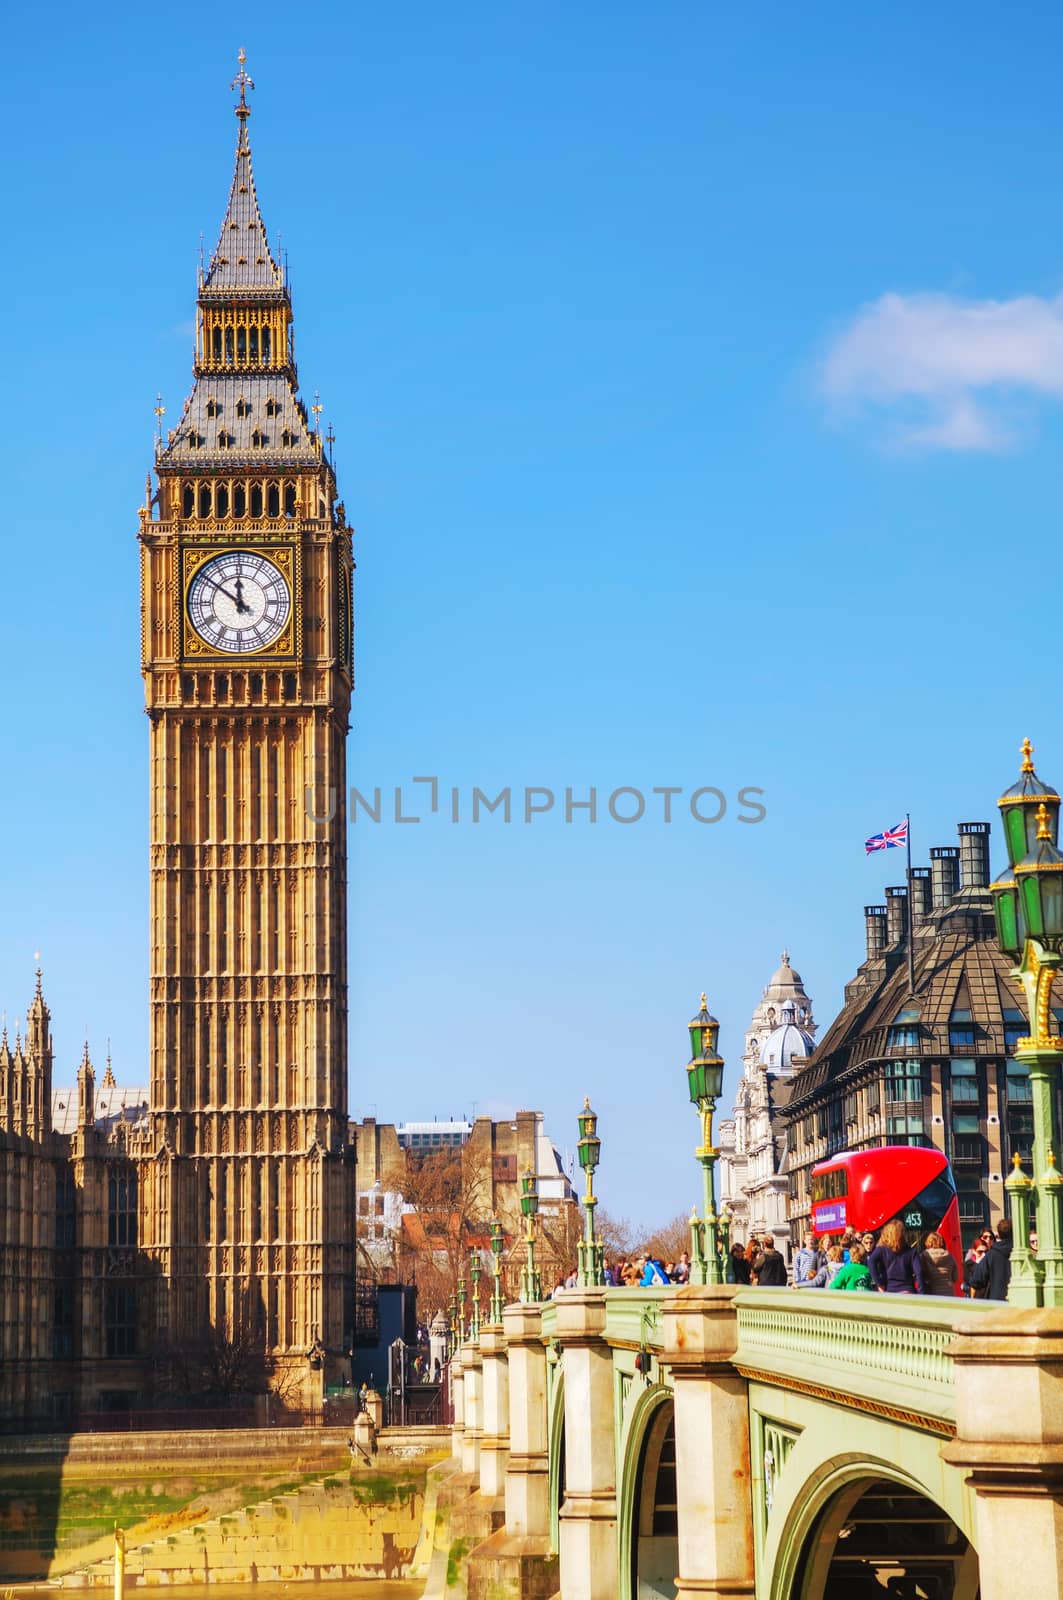 LONDON - APRIL 6: Overview of London with the Elizabeth Tower on April 6, 2015 in London, UK. The tower is officially known as the Elizabeth Tower, renamed as such to celebrate the Diamond Jubilee of Elizabeth II.